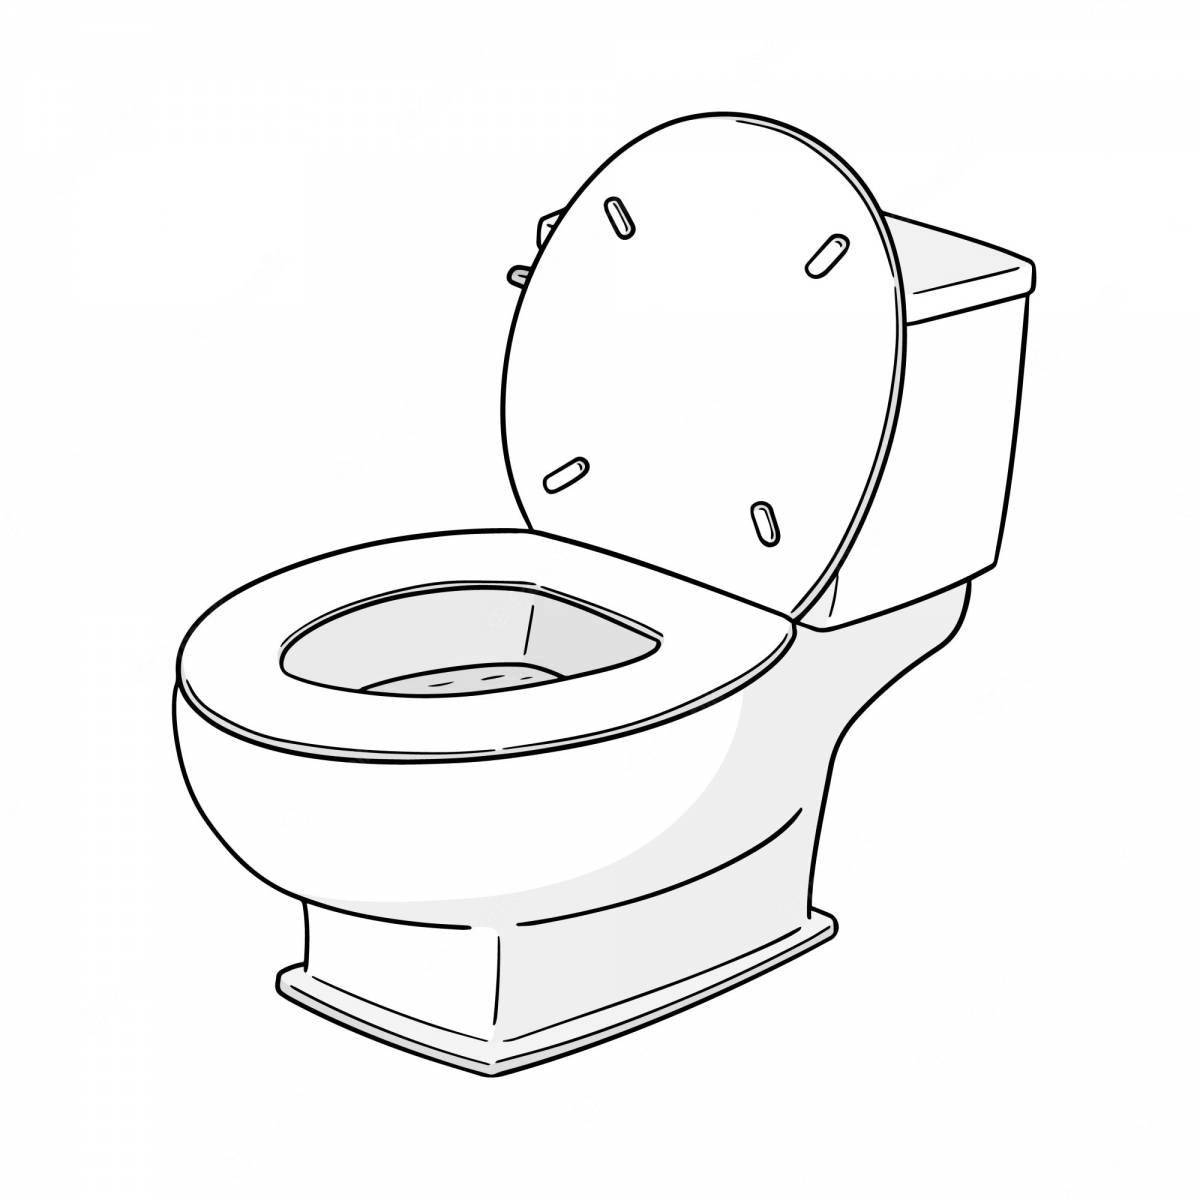 Outstanding toilet coloring page for the little ones